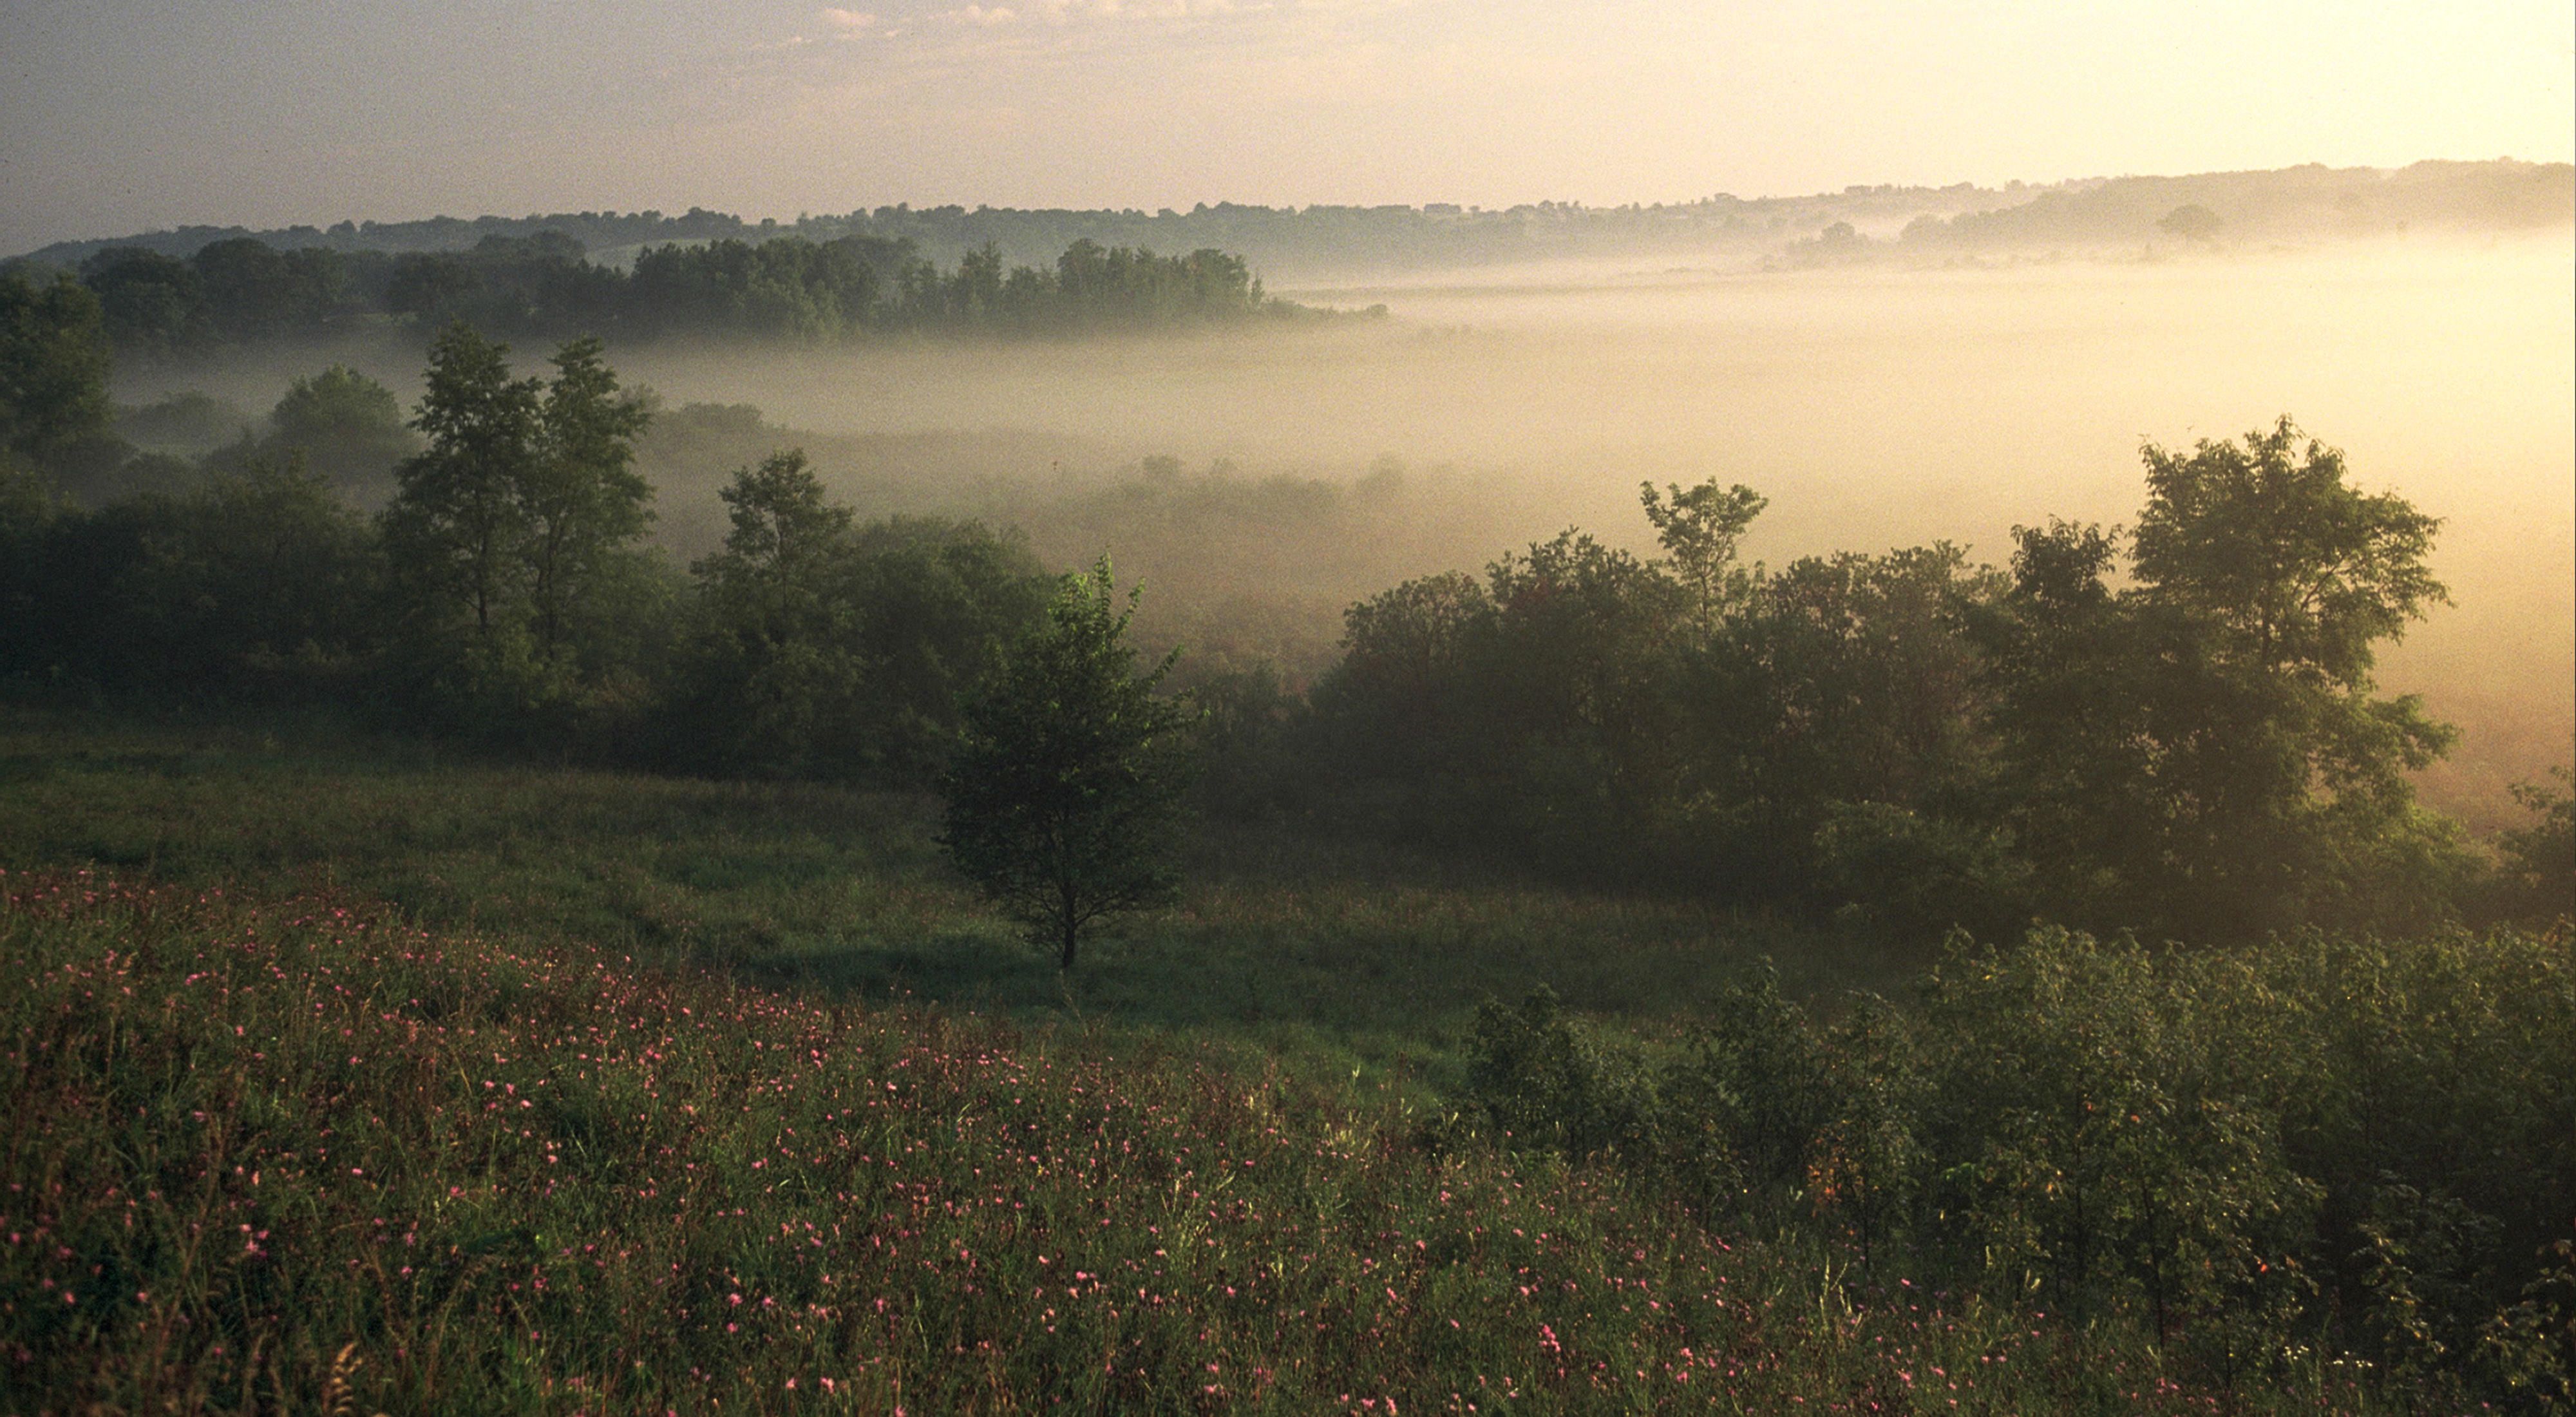 Fog rolling in over the fen, with wildflowers and trees in the foreground.